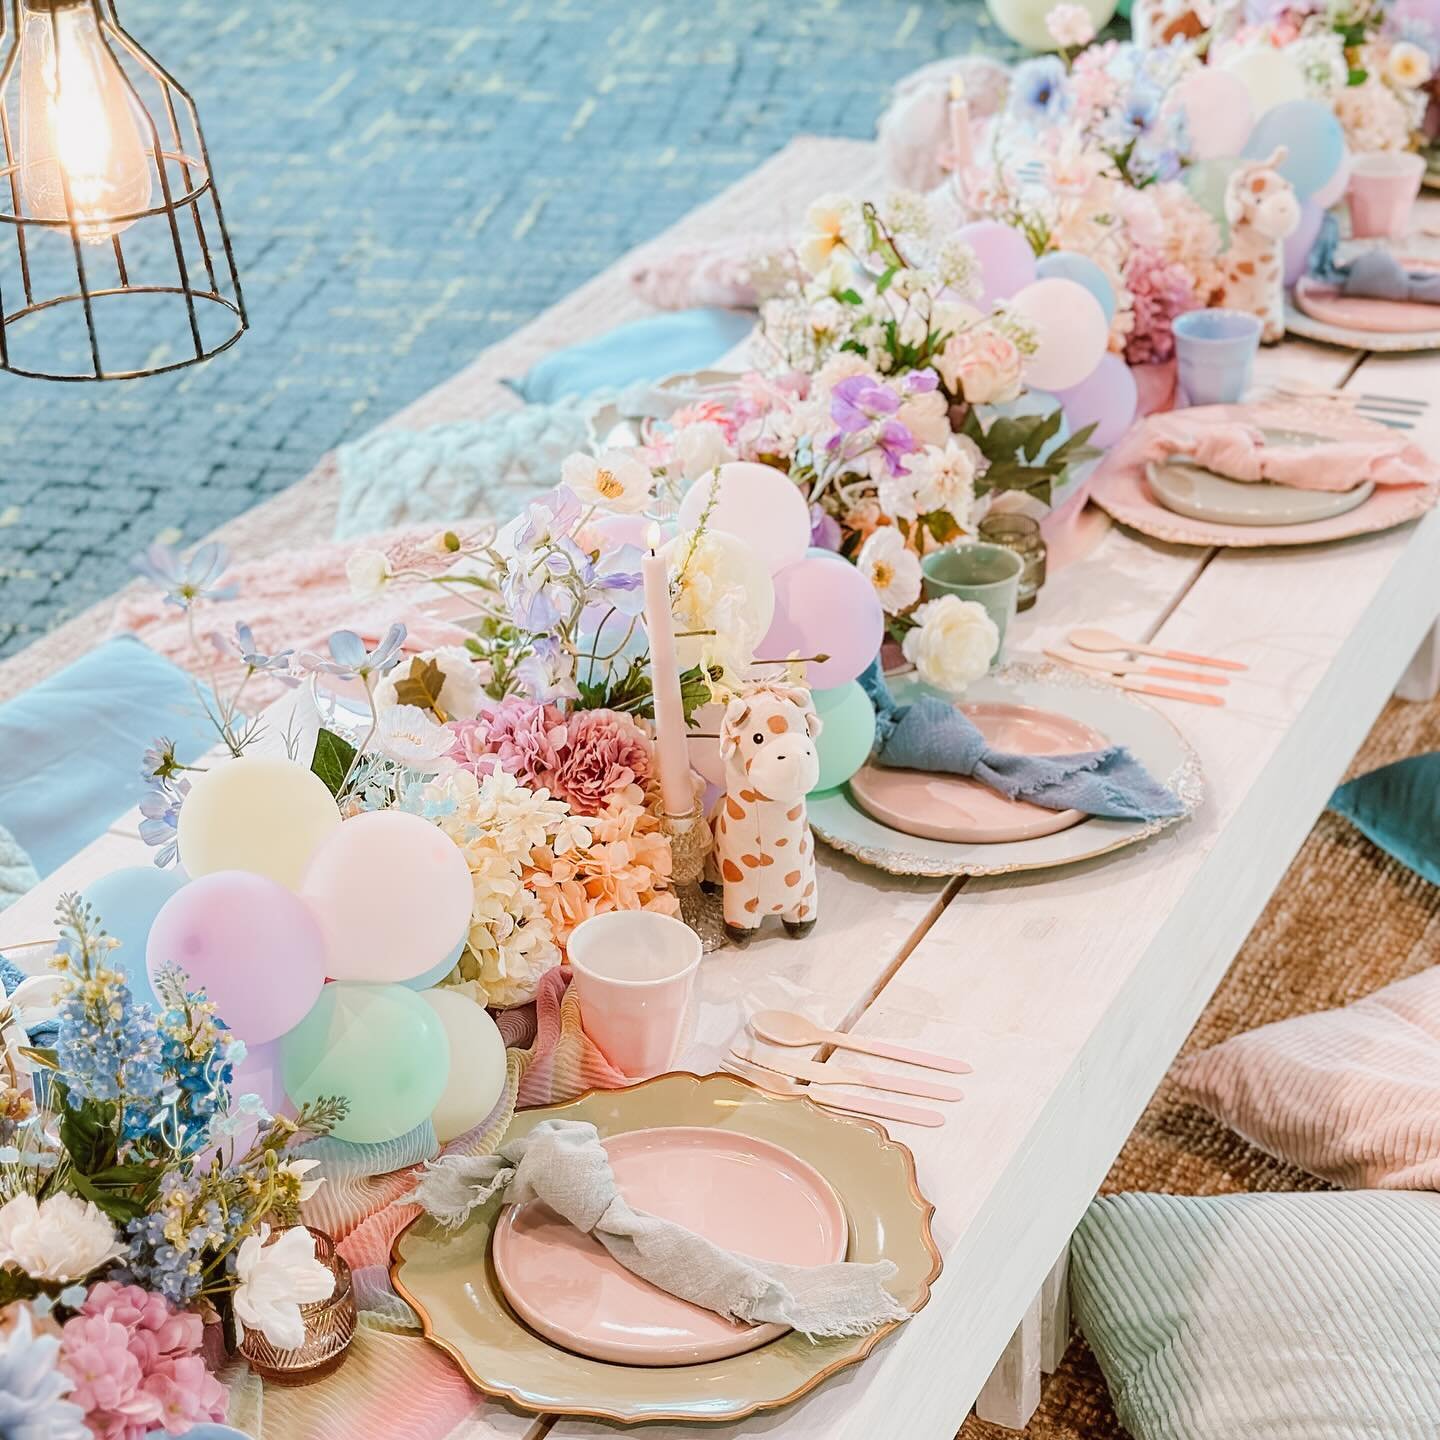 Our pastel jungle wonderland 🌿✨ Perfect picnic styling for your little one&rsquo;s birthday bash! 

Want to bring this magical world to your child&rsquo;s birthday party? Contact us to bring the magic to your next celebration 🎉 

Balloons by @party